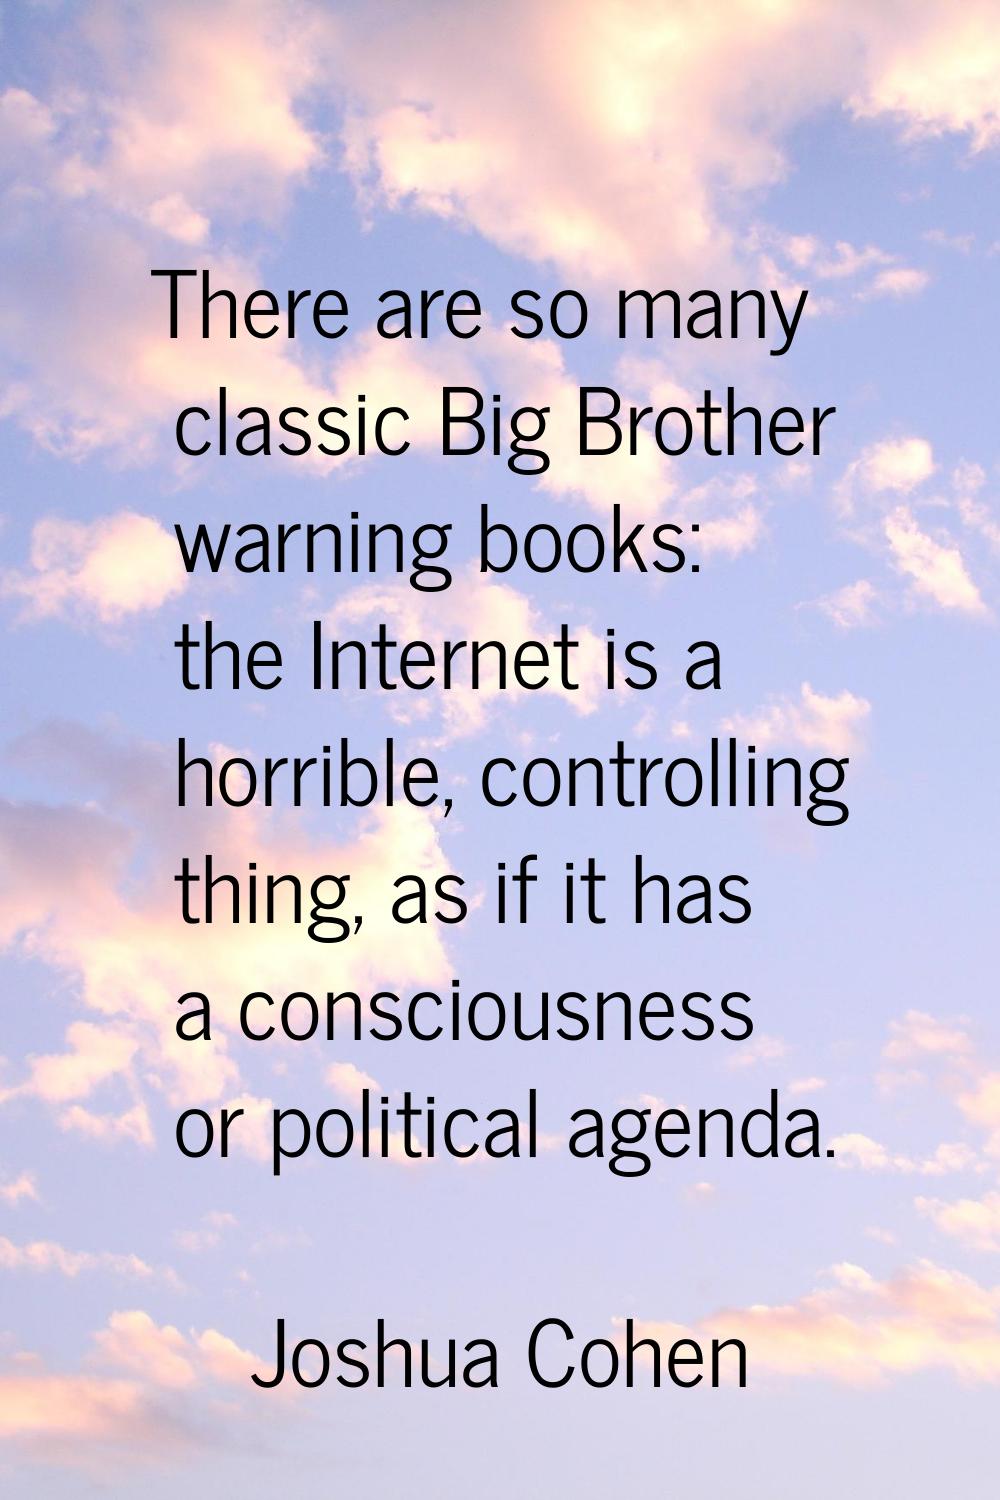 There are so many classic Big Brother warning books: the Internet is a horrible, controlling thing,